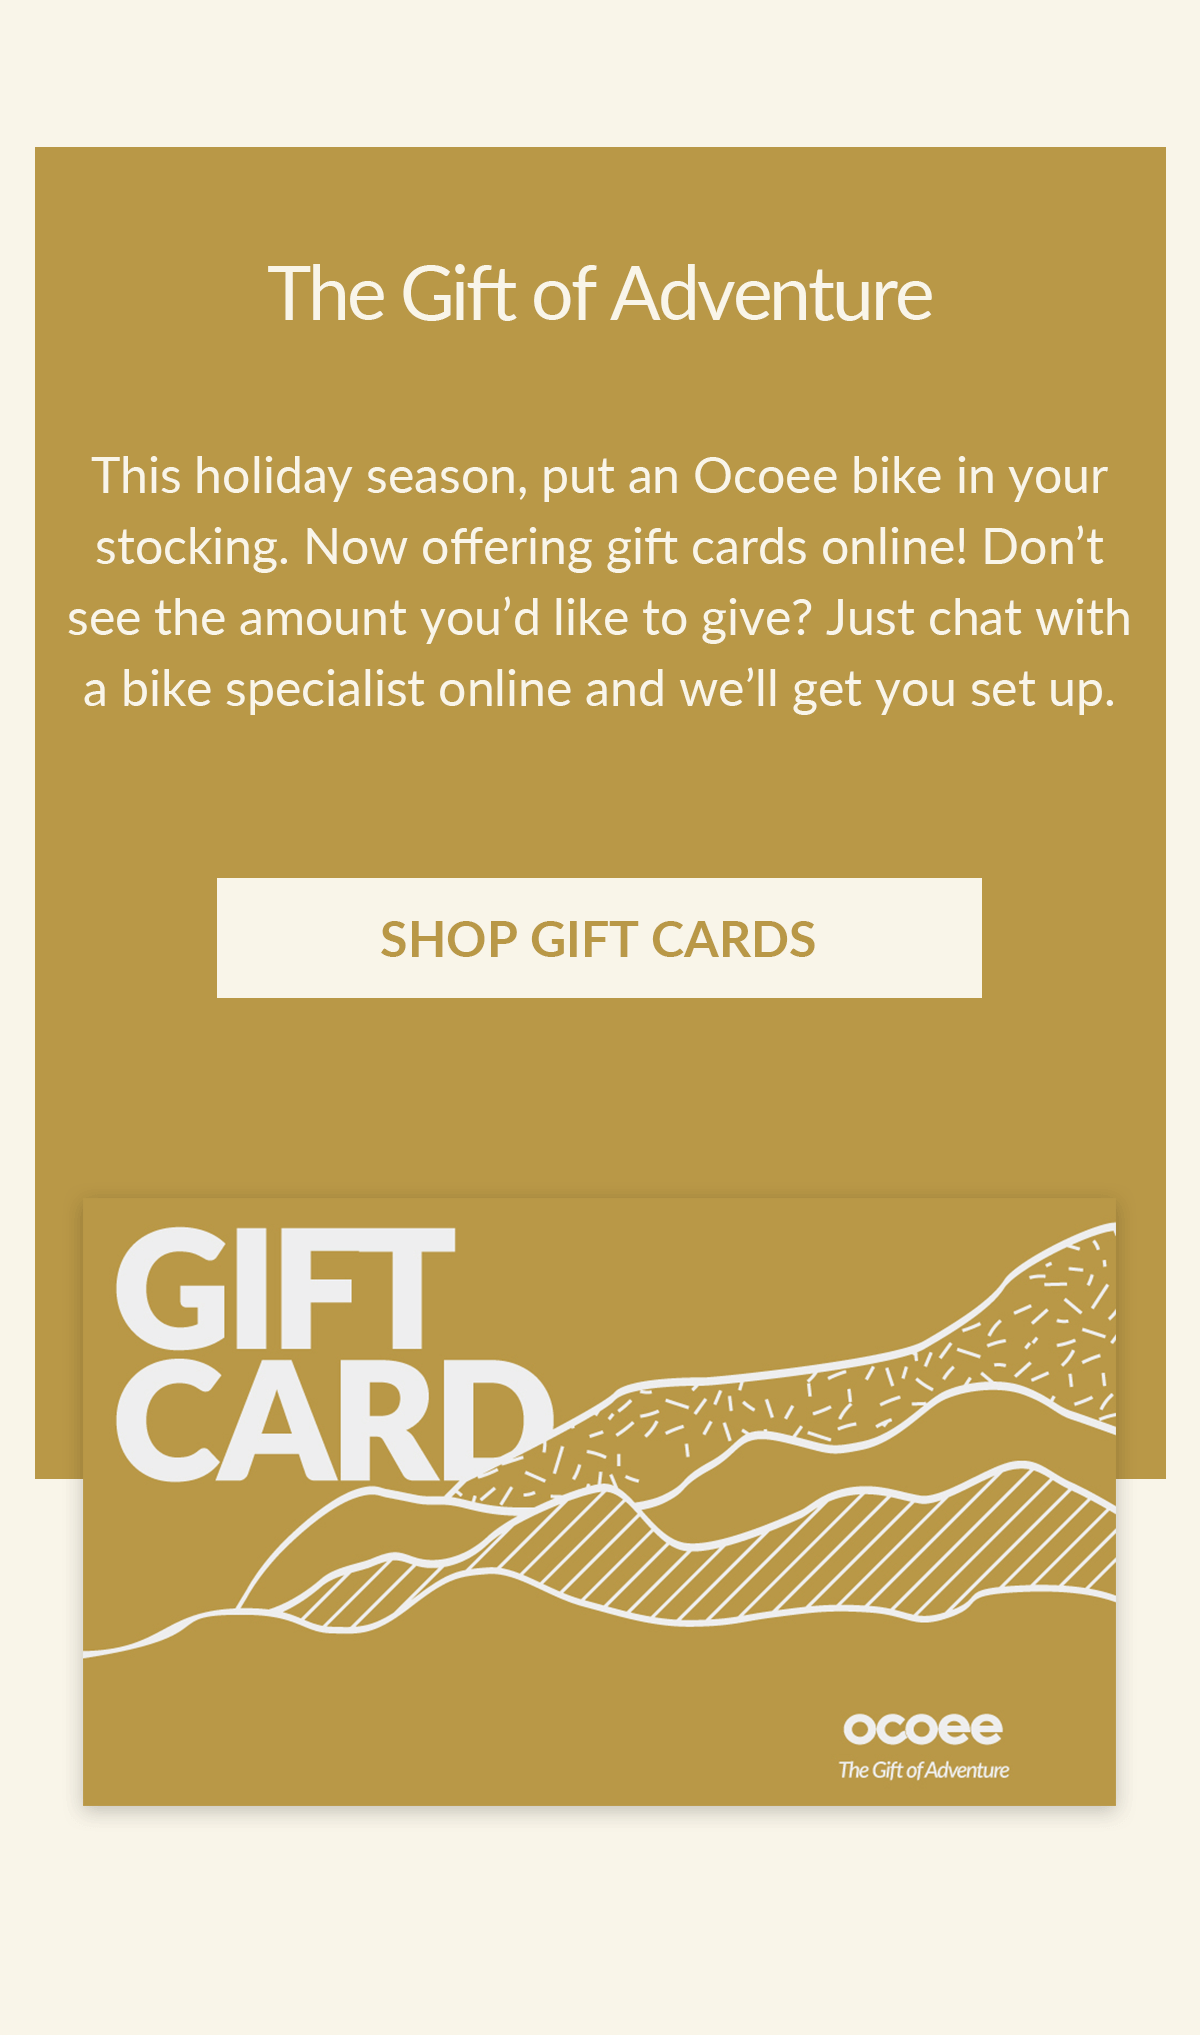 Give the gift of adventure this holiday season. Gift cards are available now online! Don't see the amount you'd like to give? Just chat with us online and we'll set you up.